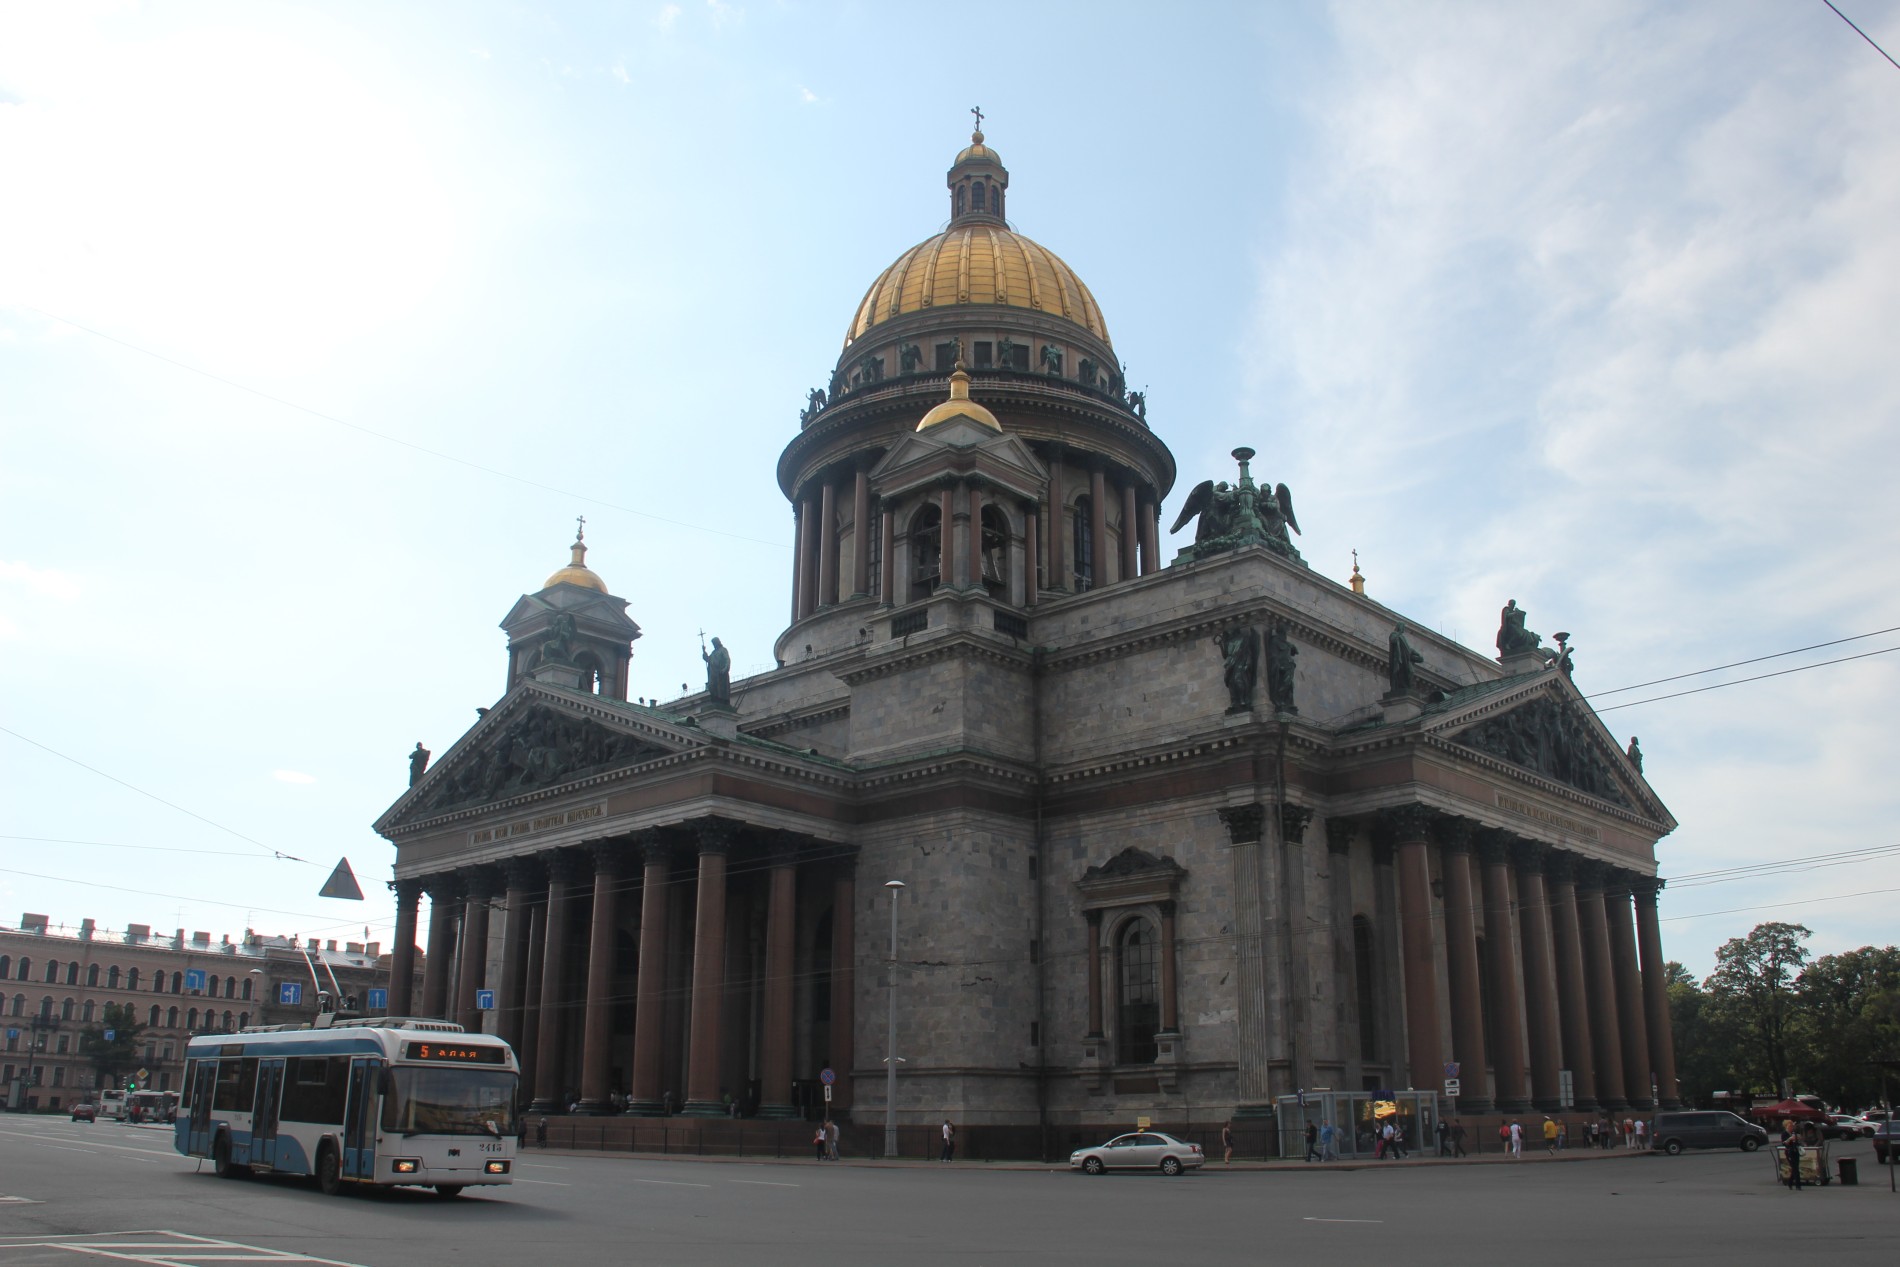 St. Isaac's Cathedral is one of St. Petersburg's most well-known landmarks.